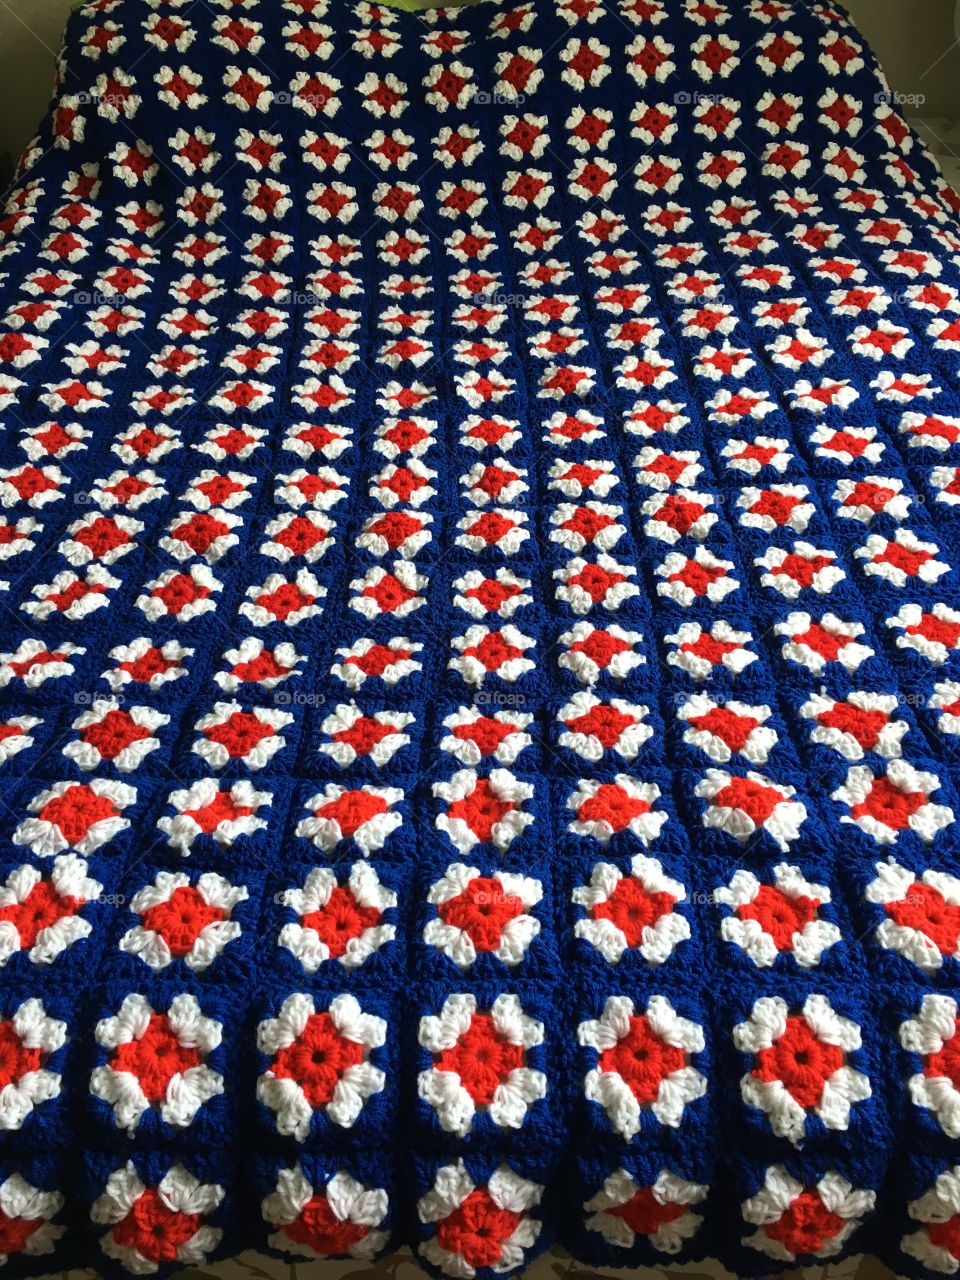 Red White & Blue Queen Size Blanket 